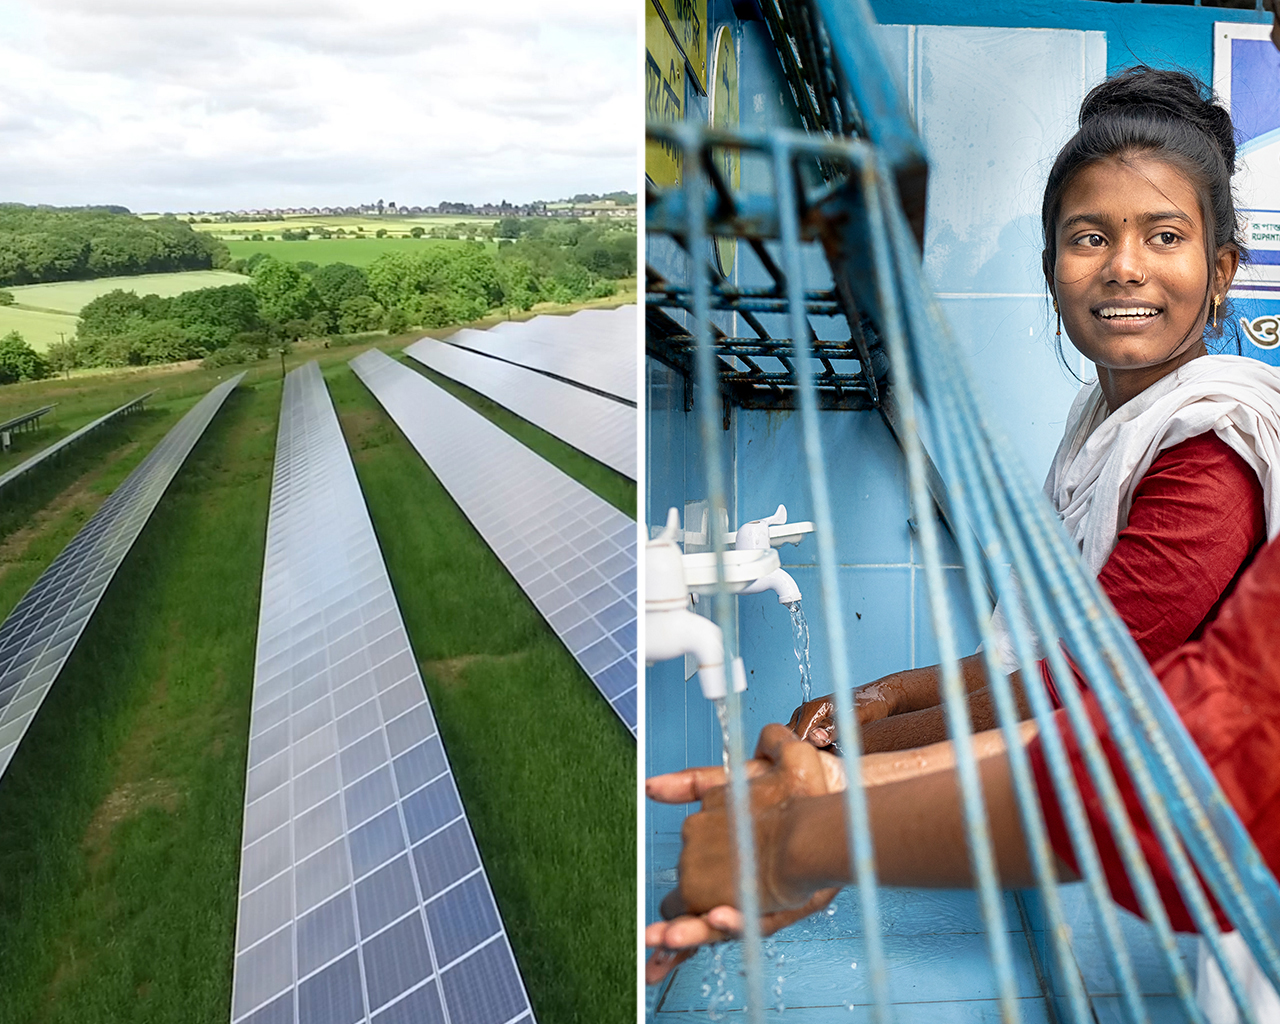 Group of three images grouped side by side including two women smiling, a toast with two Coca-Cola bottles, and the top view of a group of solar electric panels in an open field.